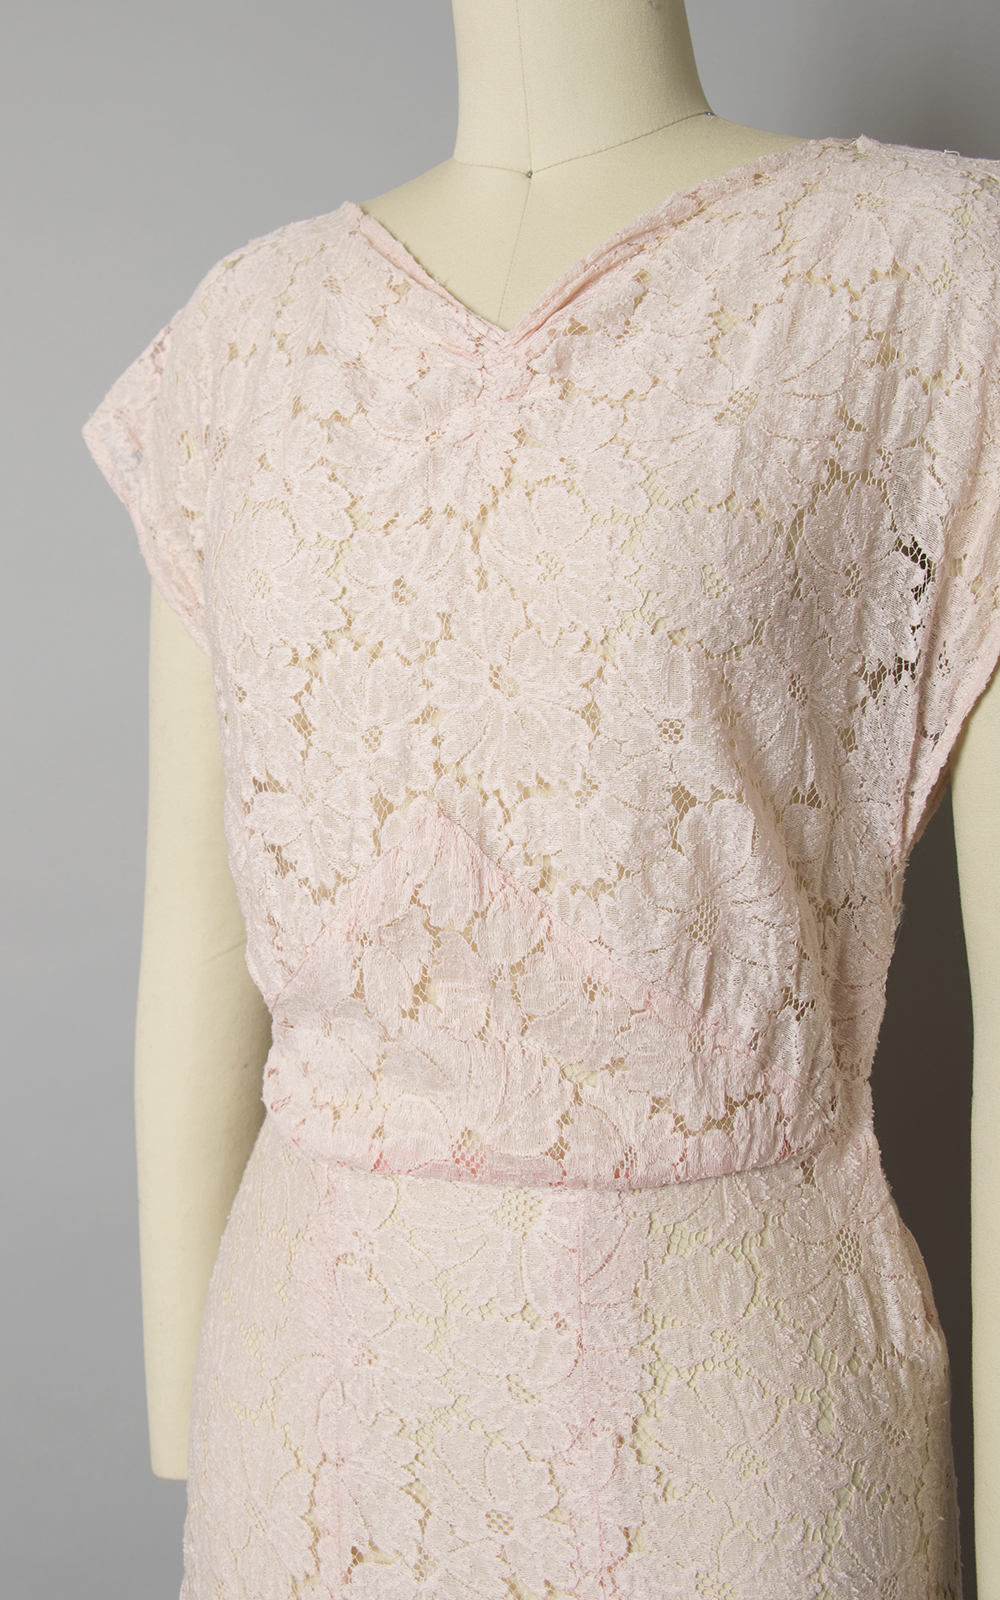 Vintage 1930s Gown | 30s Sheer Cotton Lace Light Pink Full Length Wedding Bridesmaid Tea Dress (small)